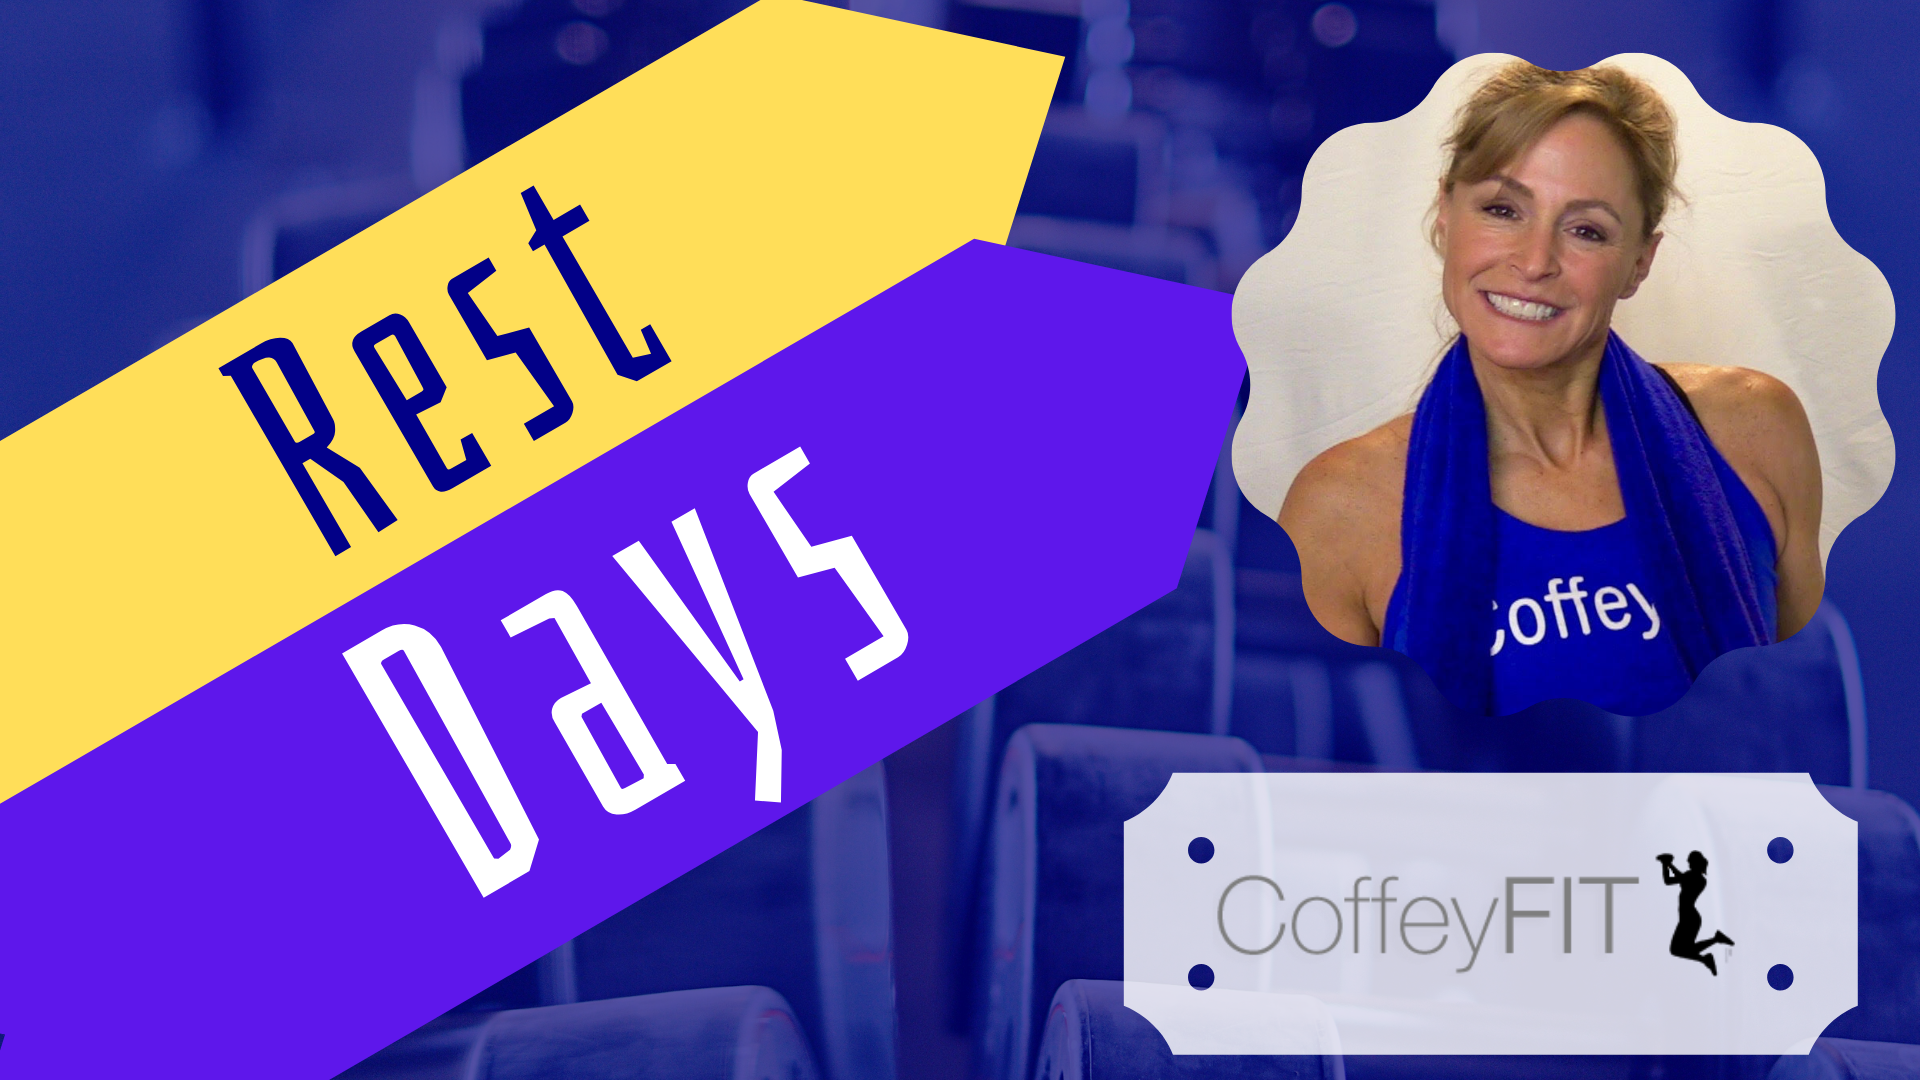 Image of Rest Days Video Thumbnail - CoffeyFit - Coffey In The Morning, The Energy Boost That Lasts All Day!